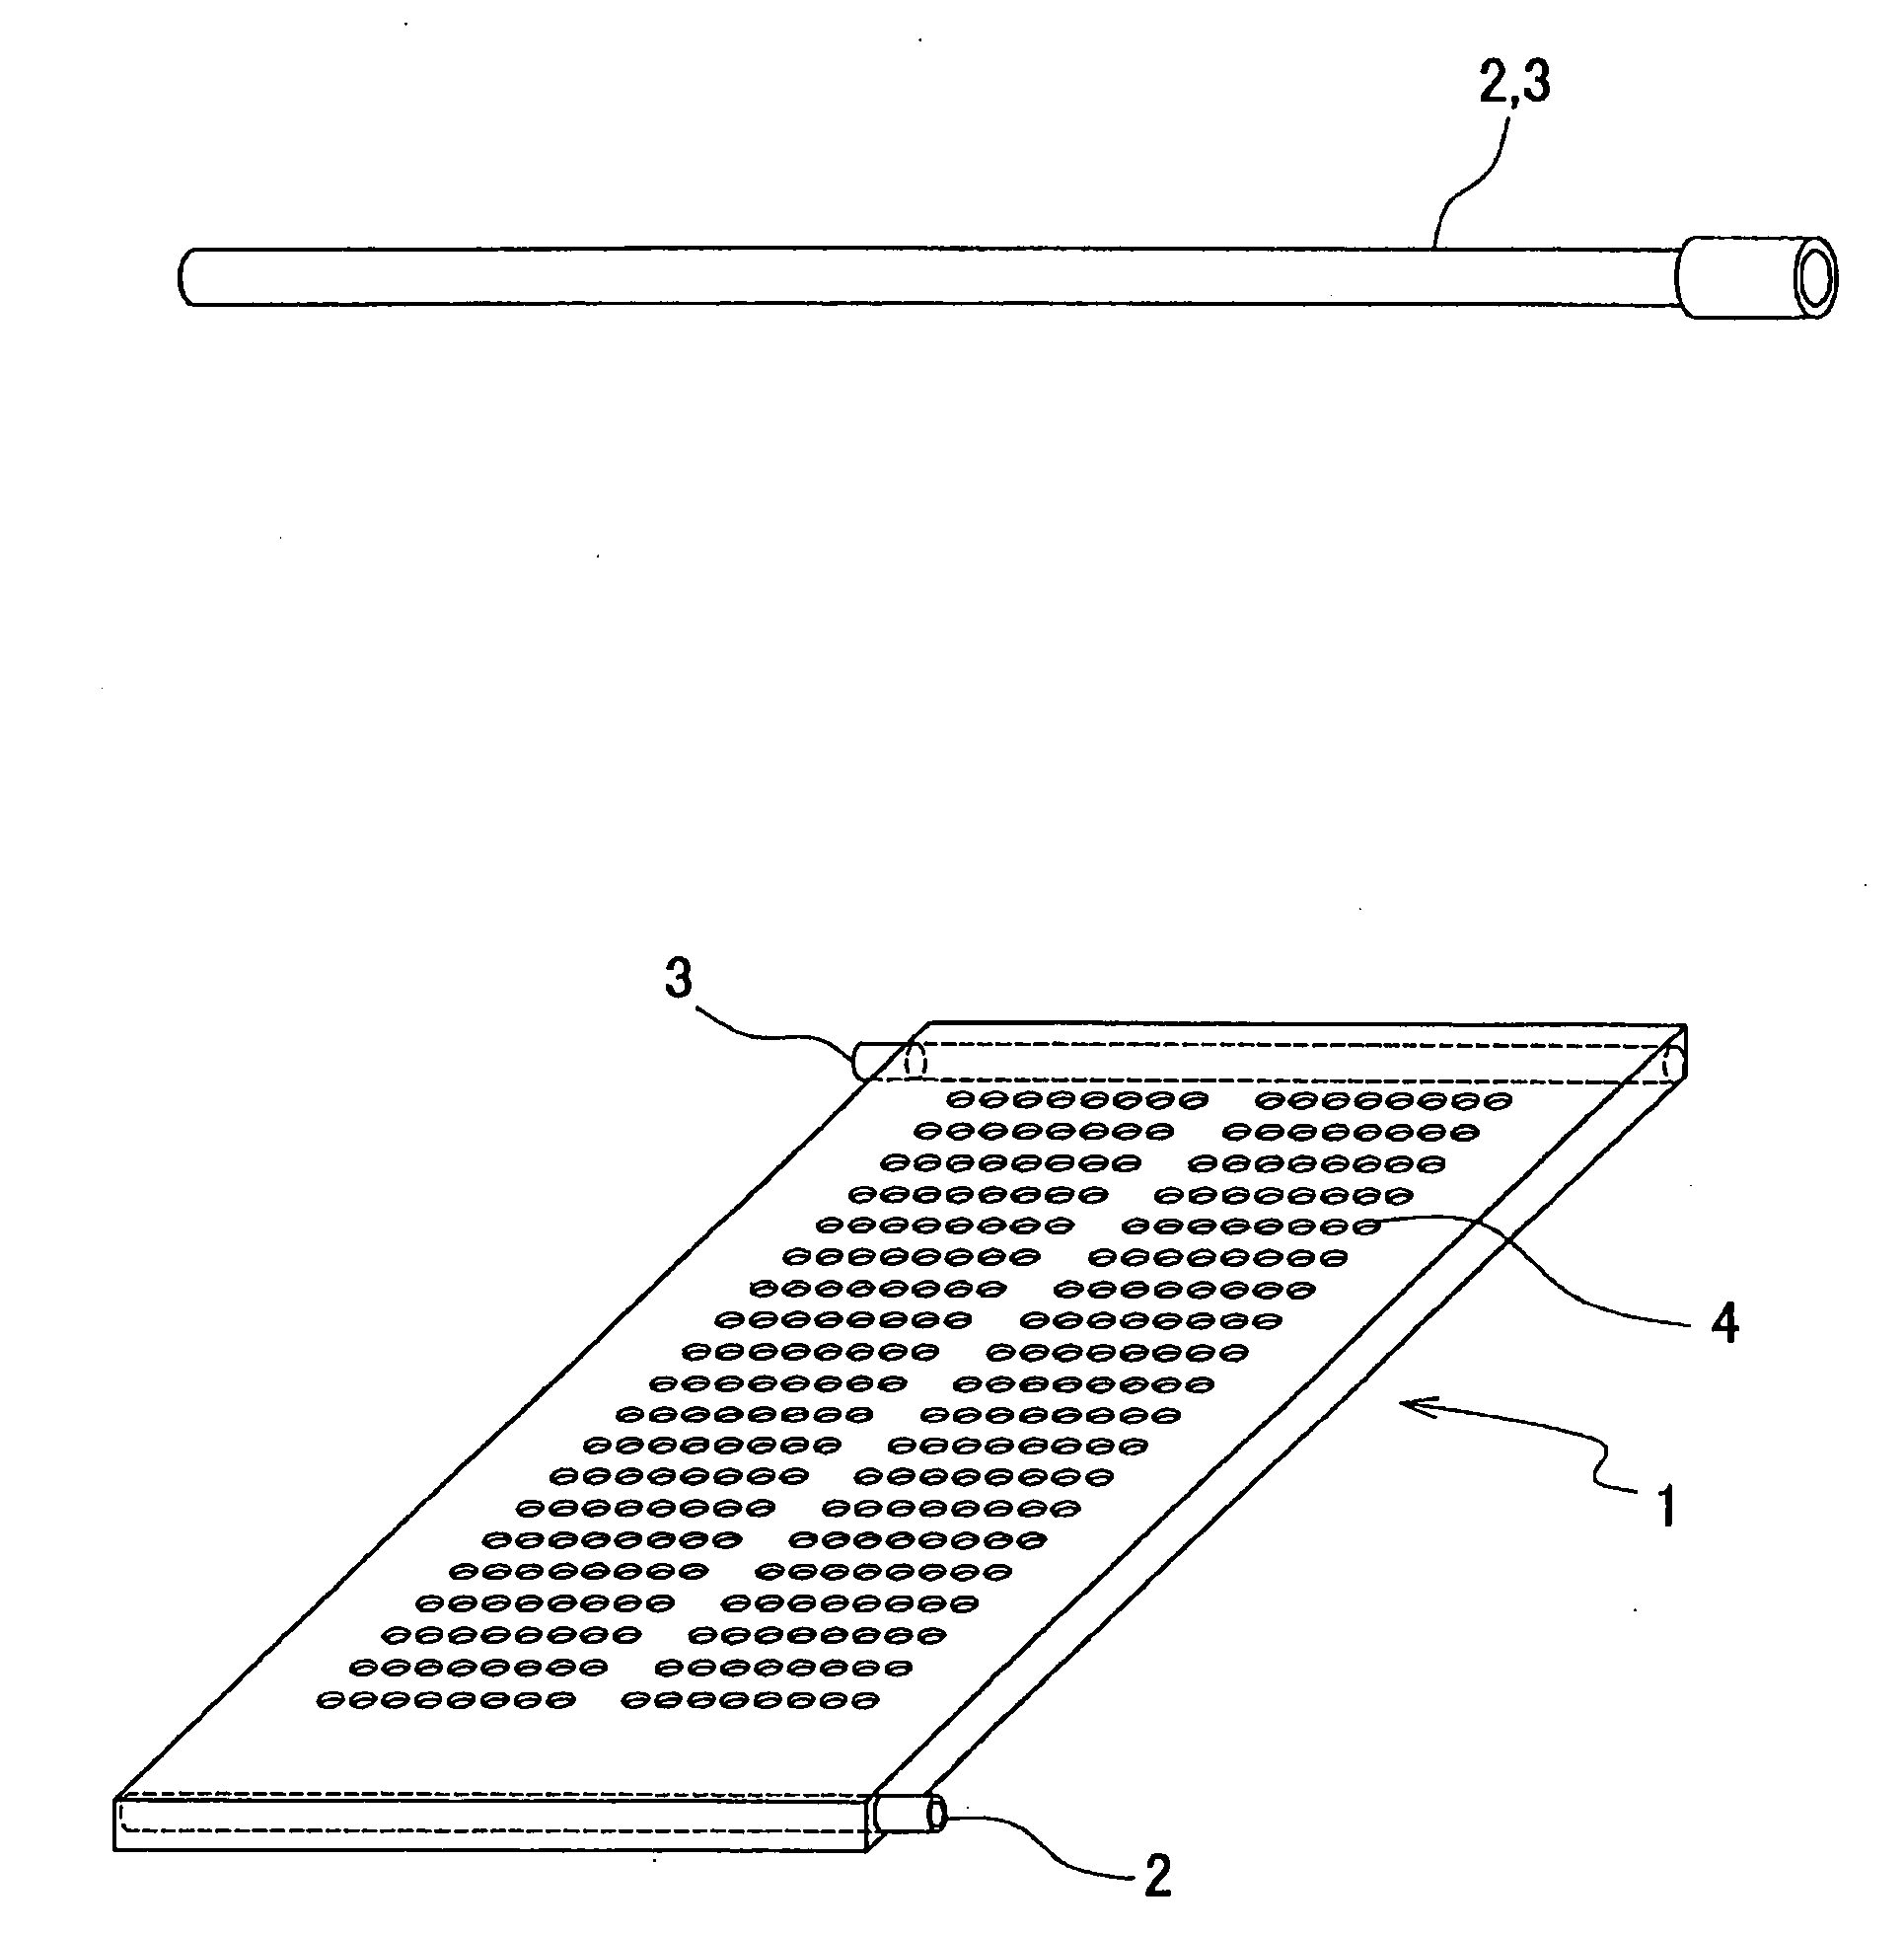 Multiwell incubation apparatus and method of analysis using the same